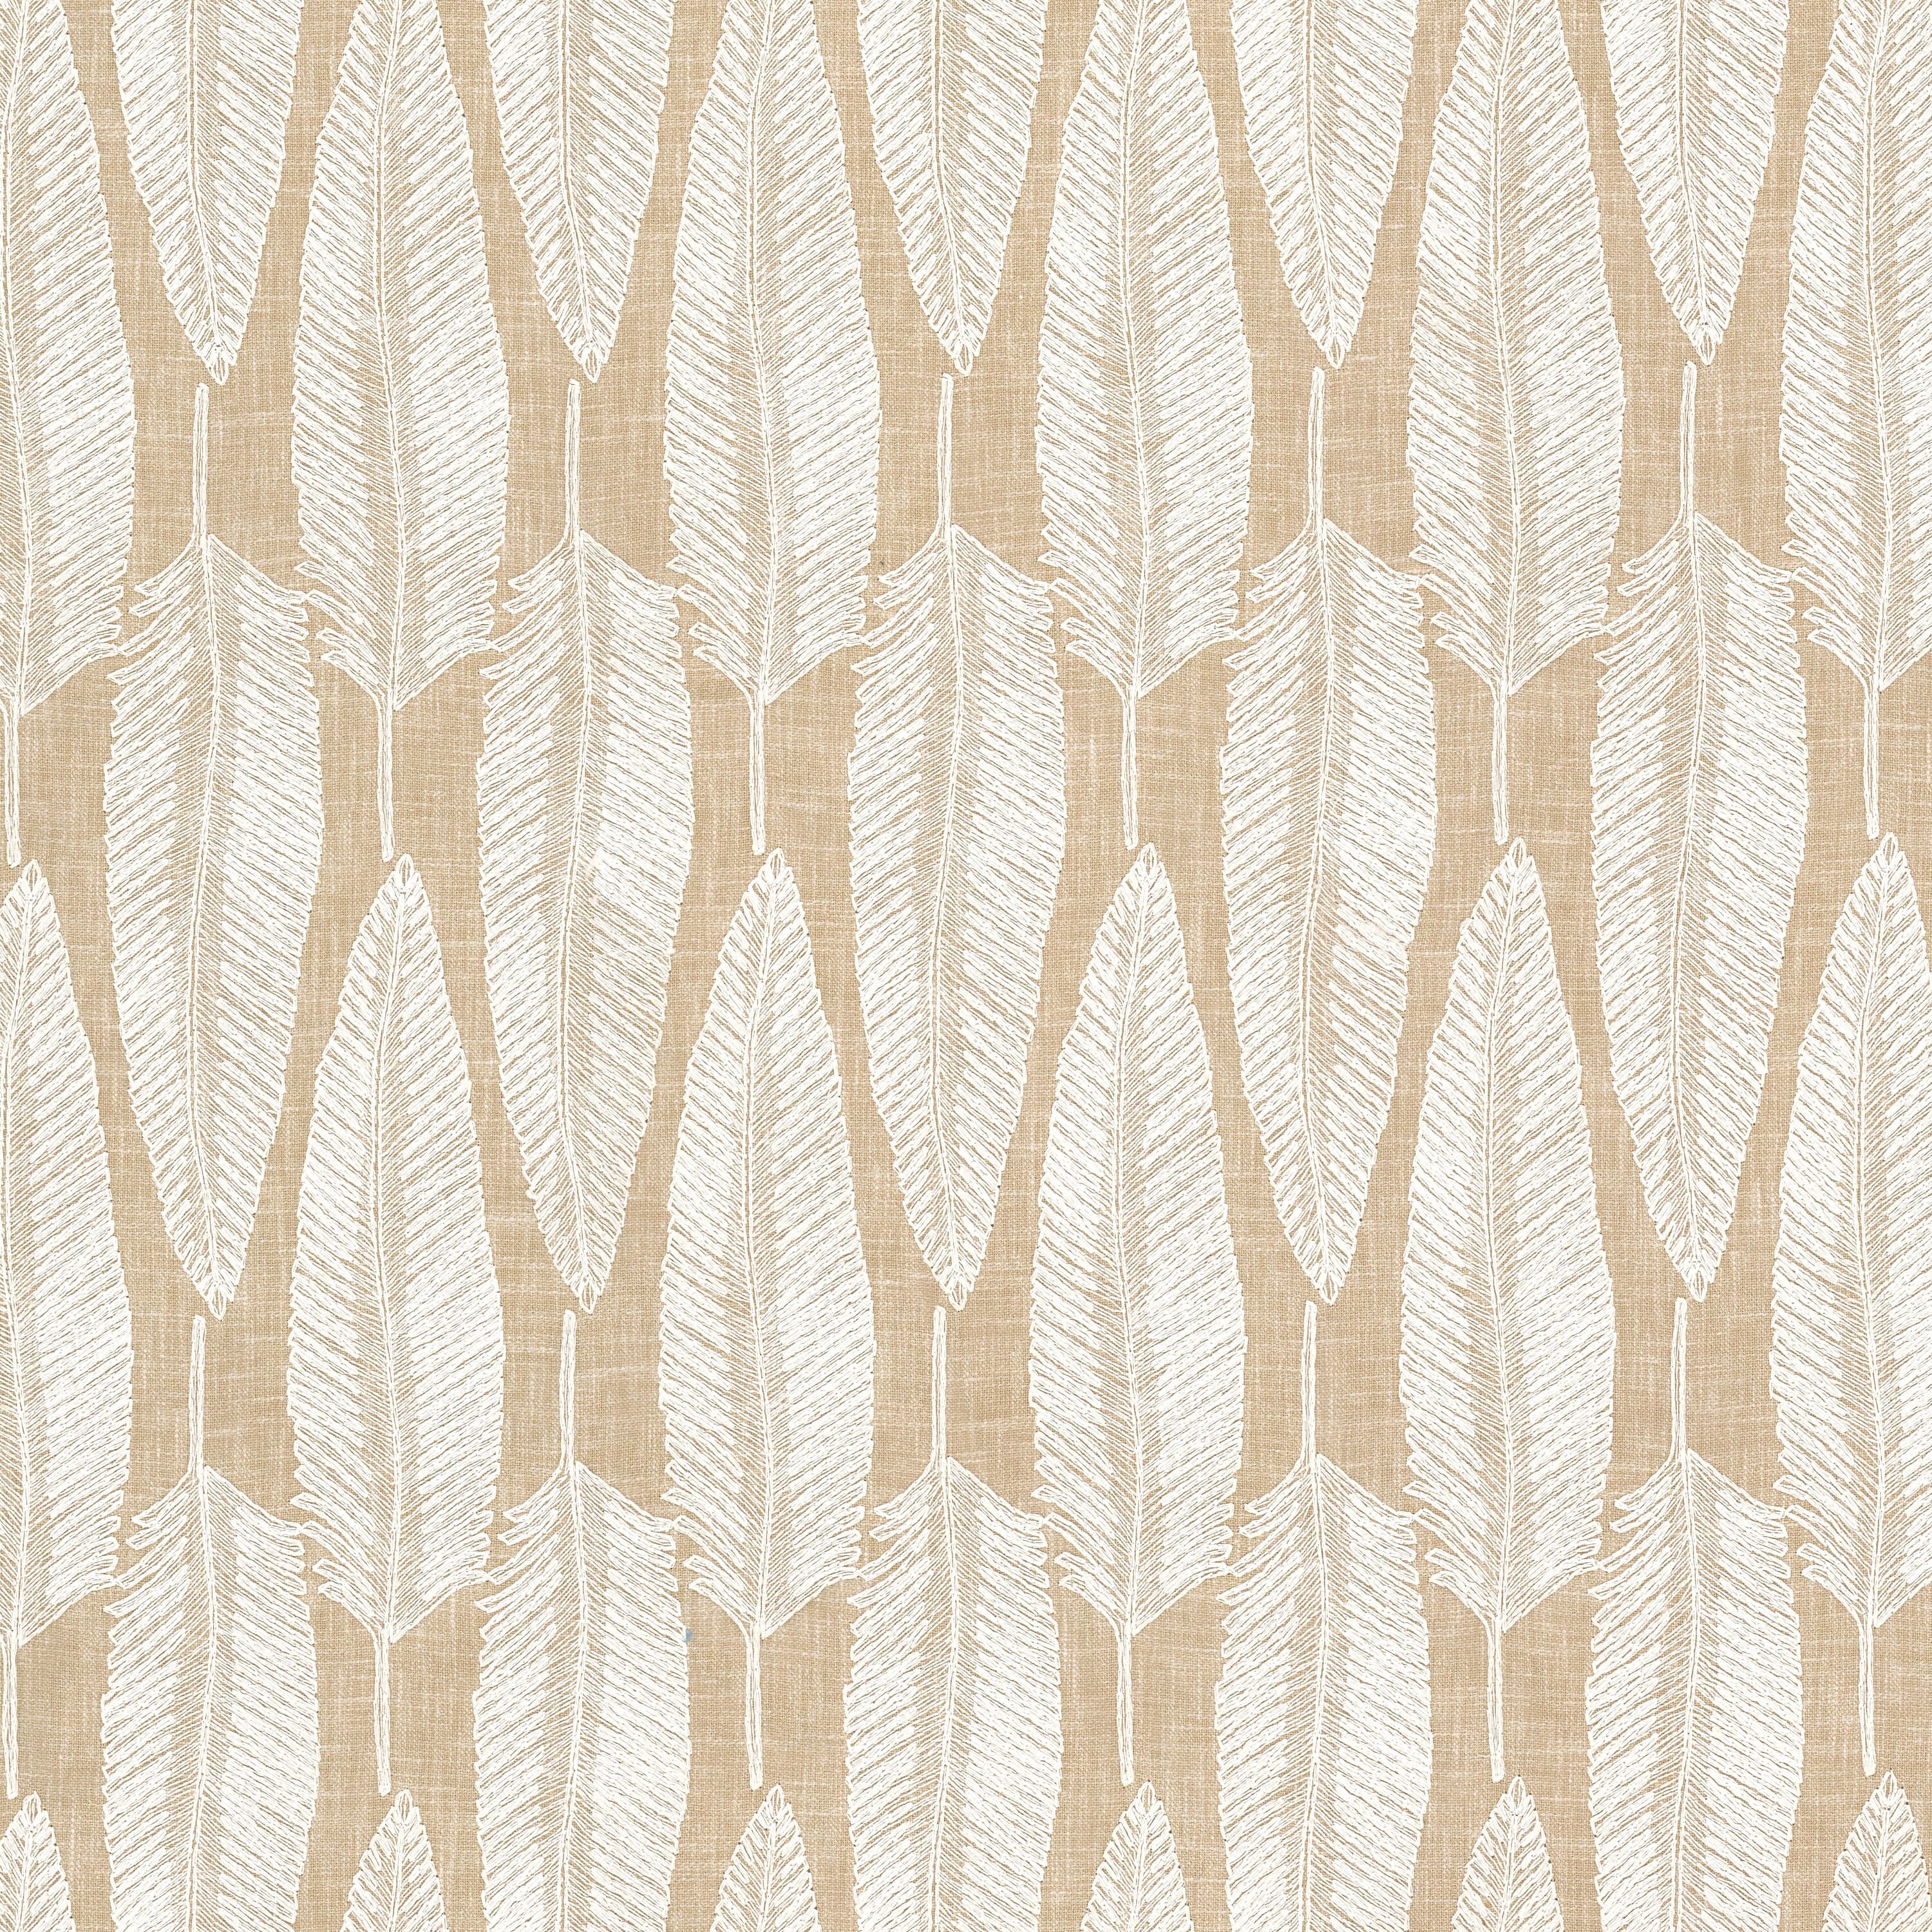 Bewitched 1 Beige by Stout Fabric